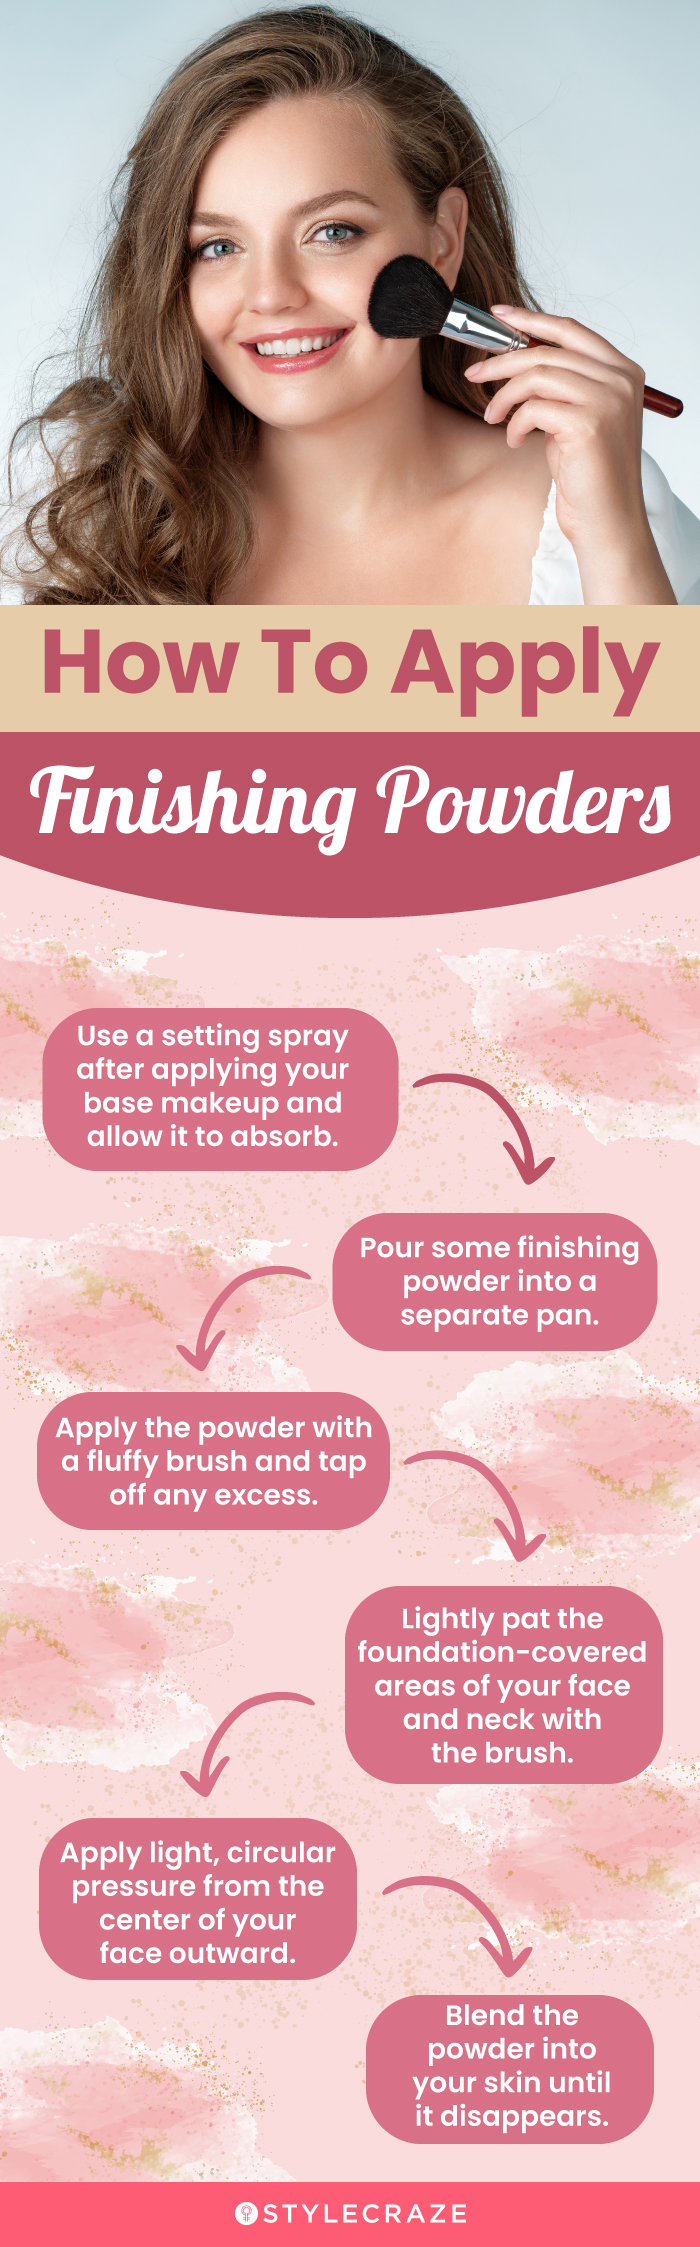 How To Apply Finishing Powders (infographic)